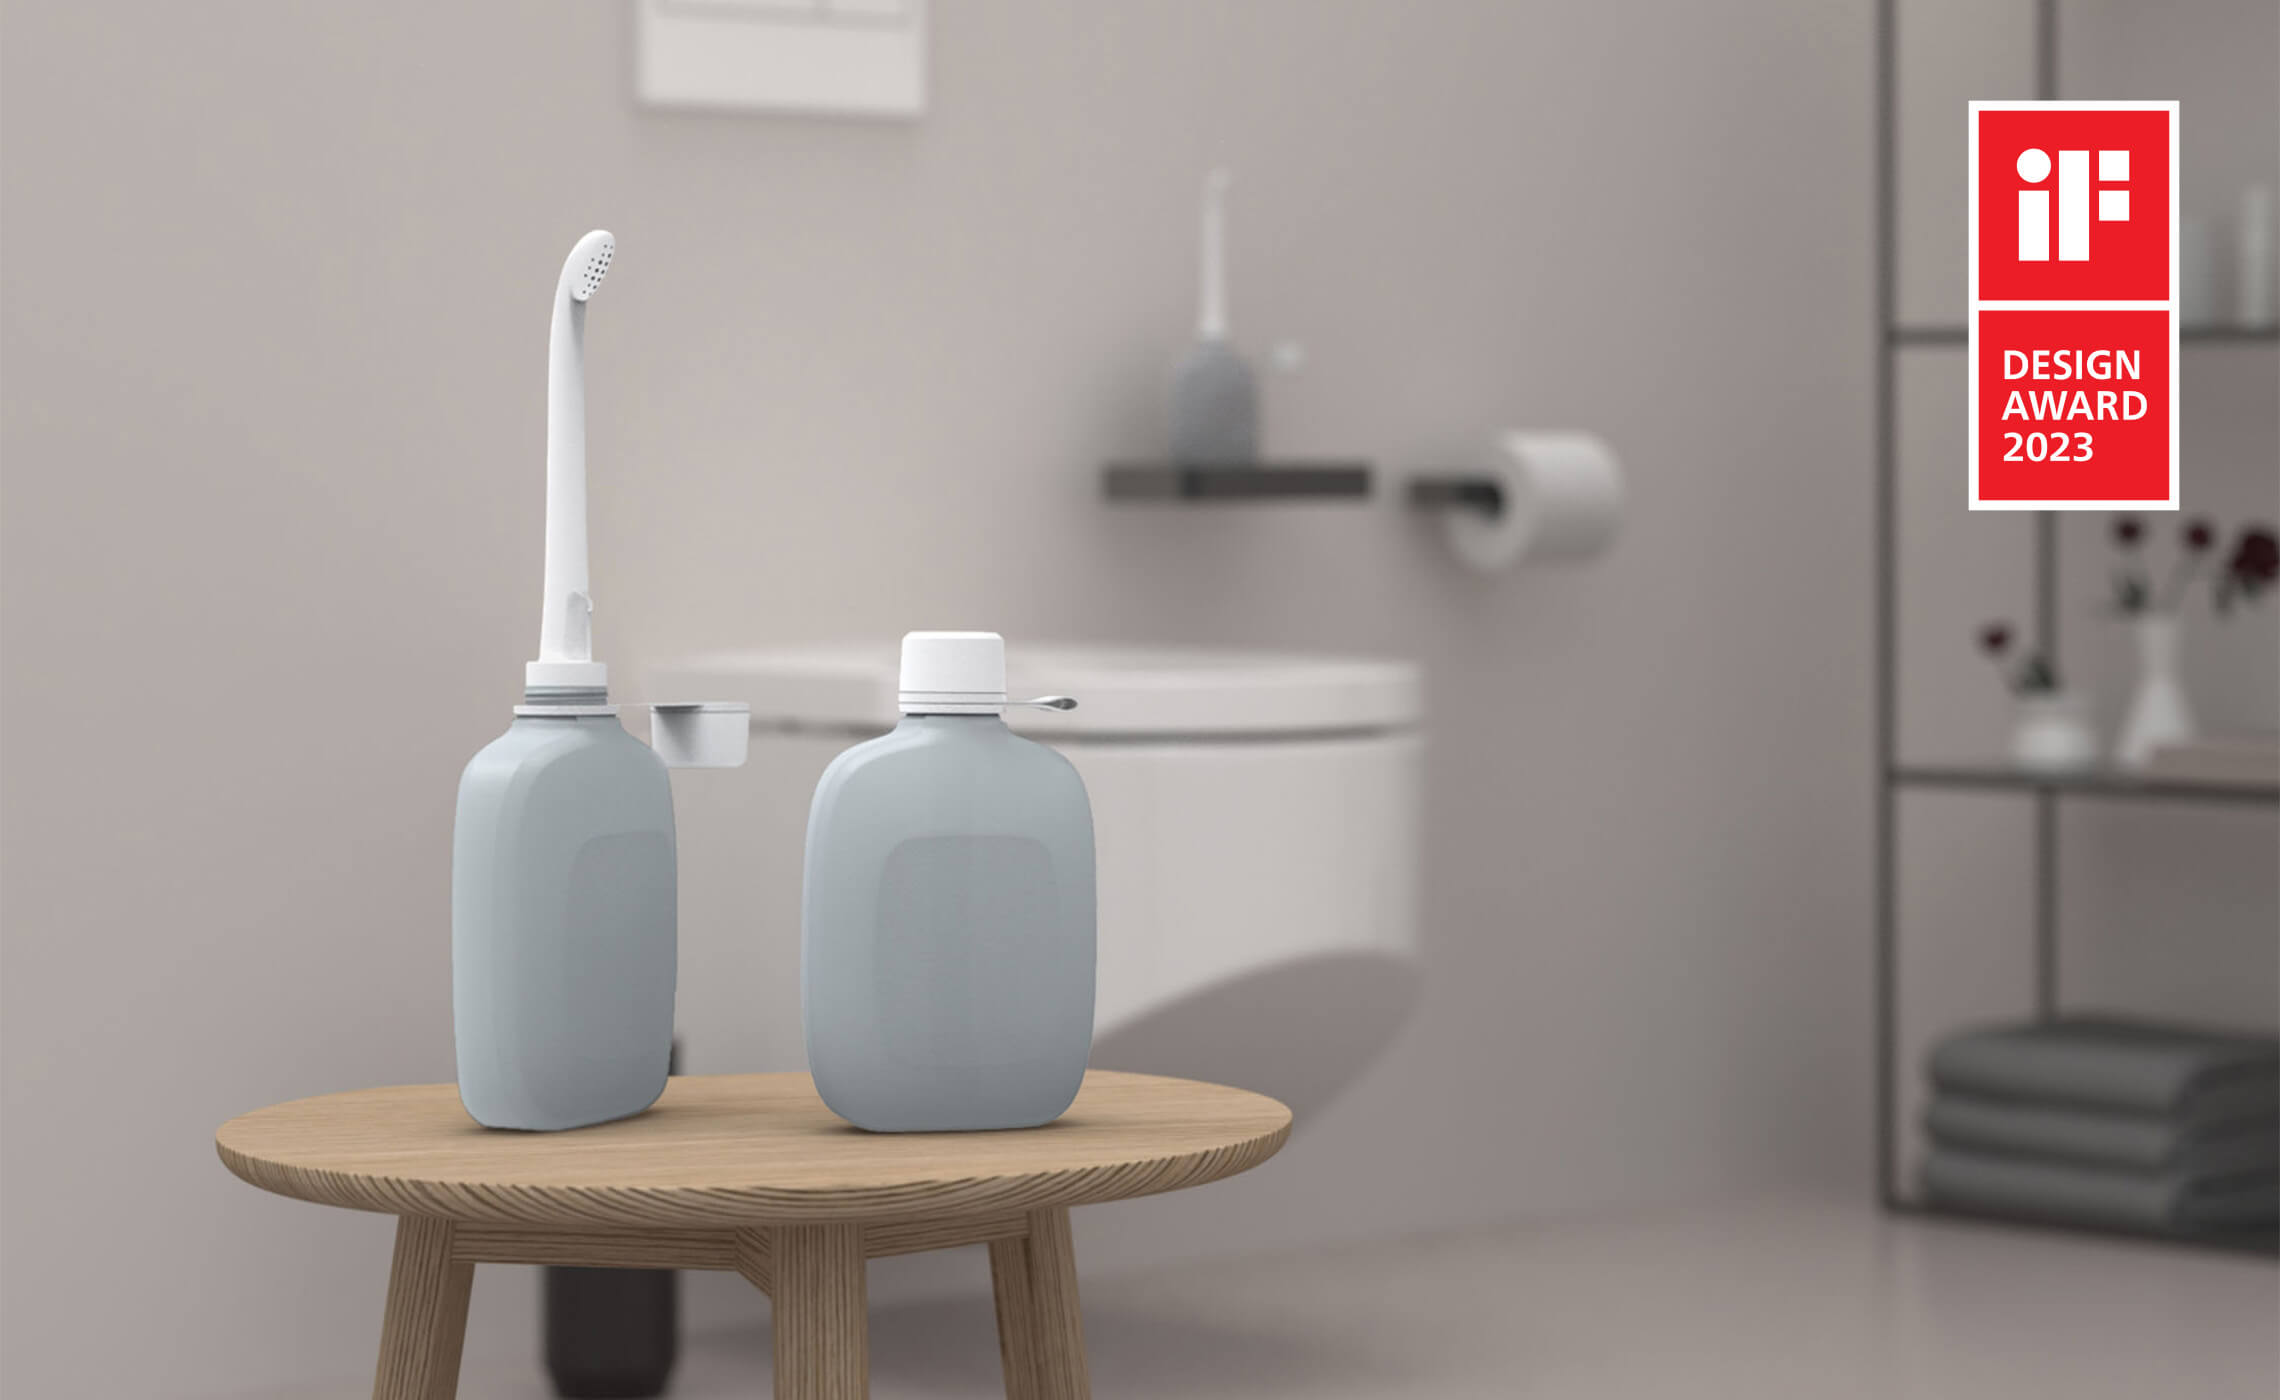 The mobile bidet in the closed and open state in the bathroom with the iF Design Award logo.